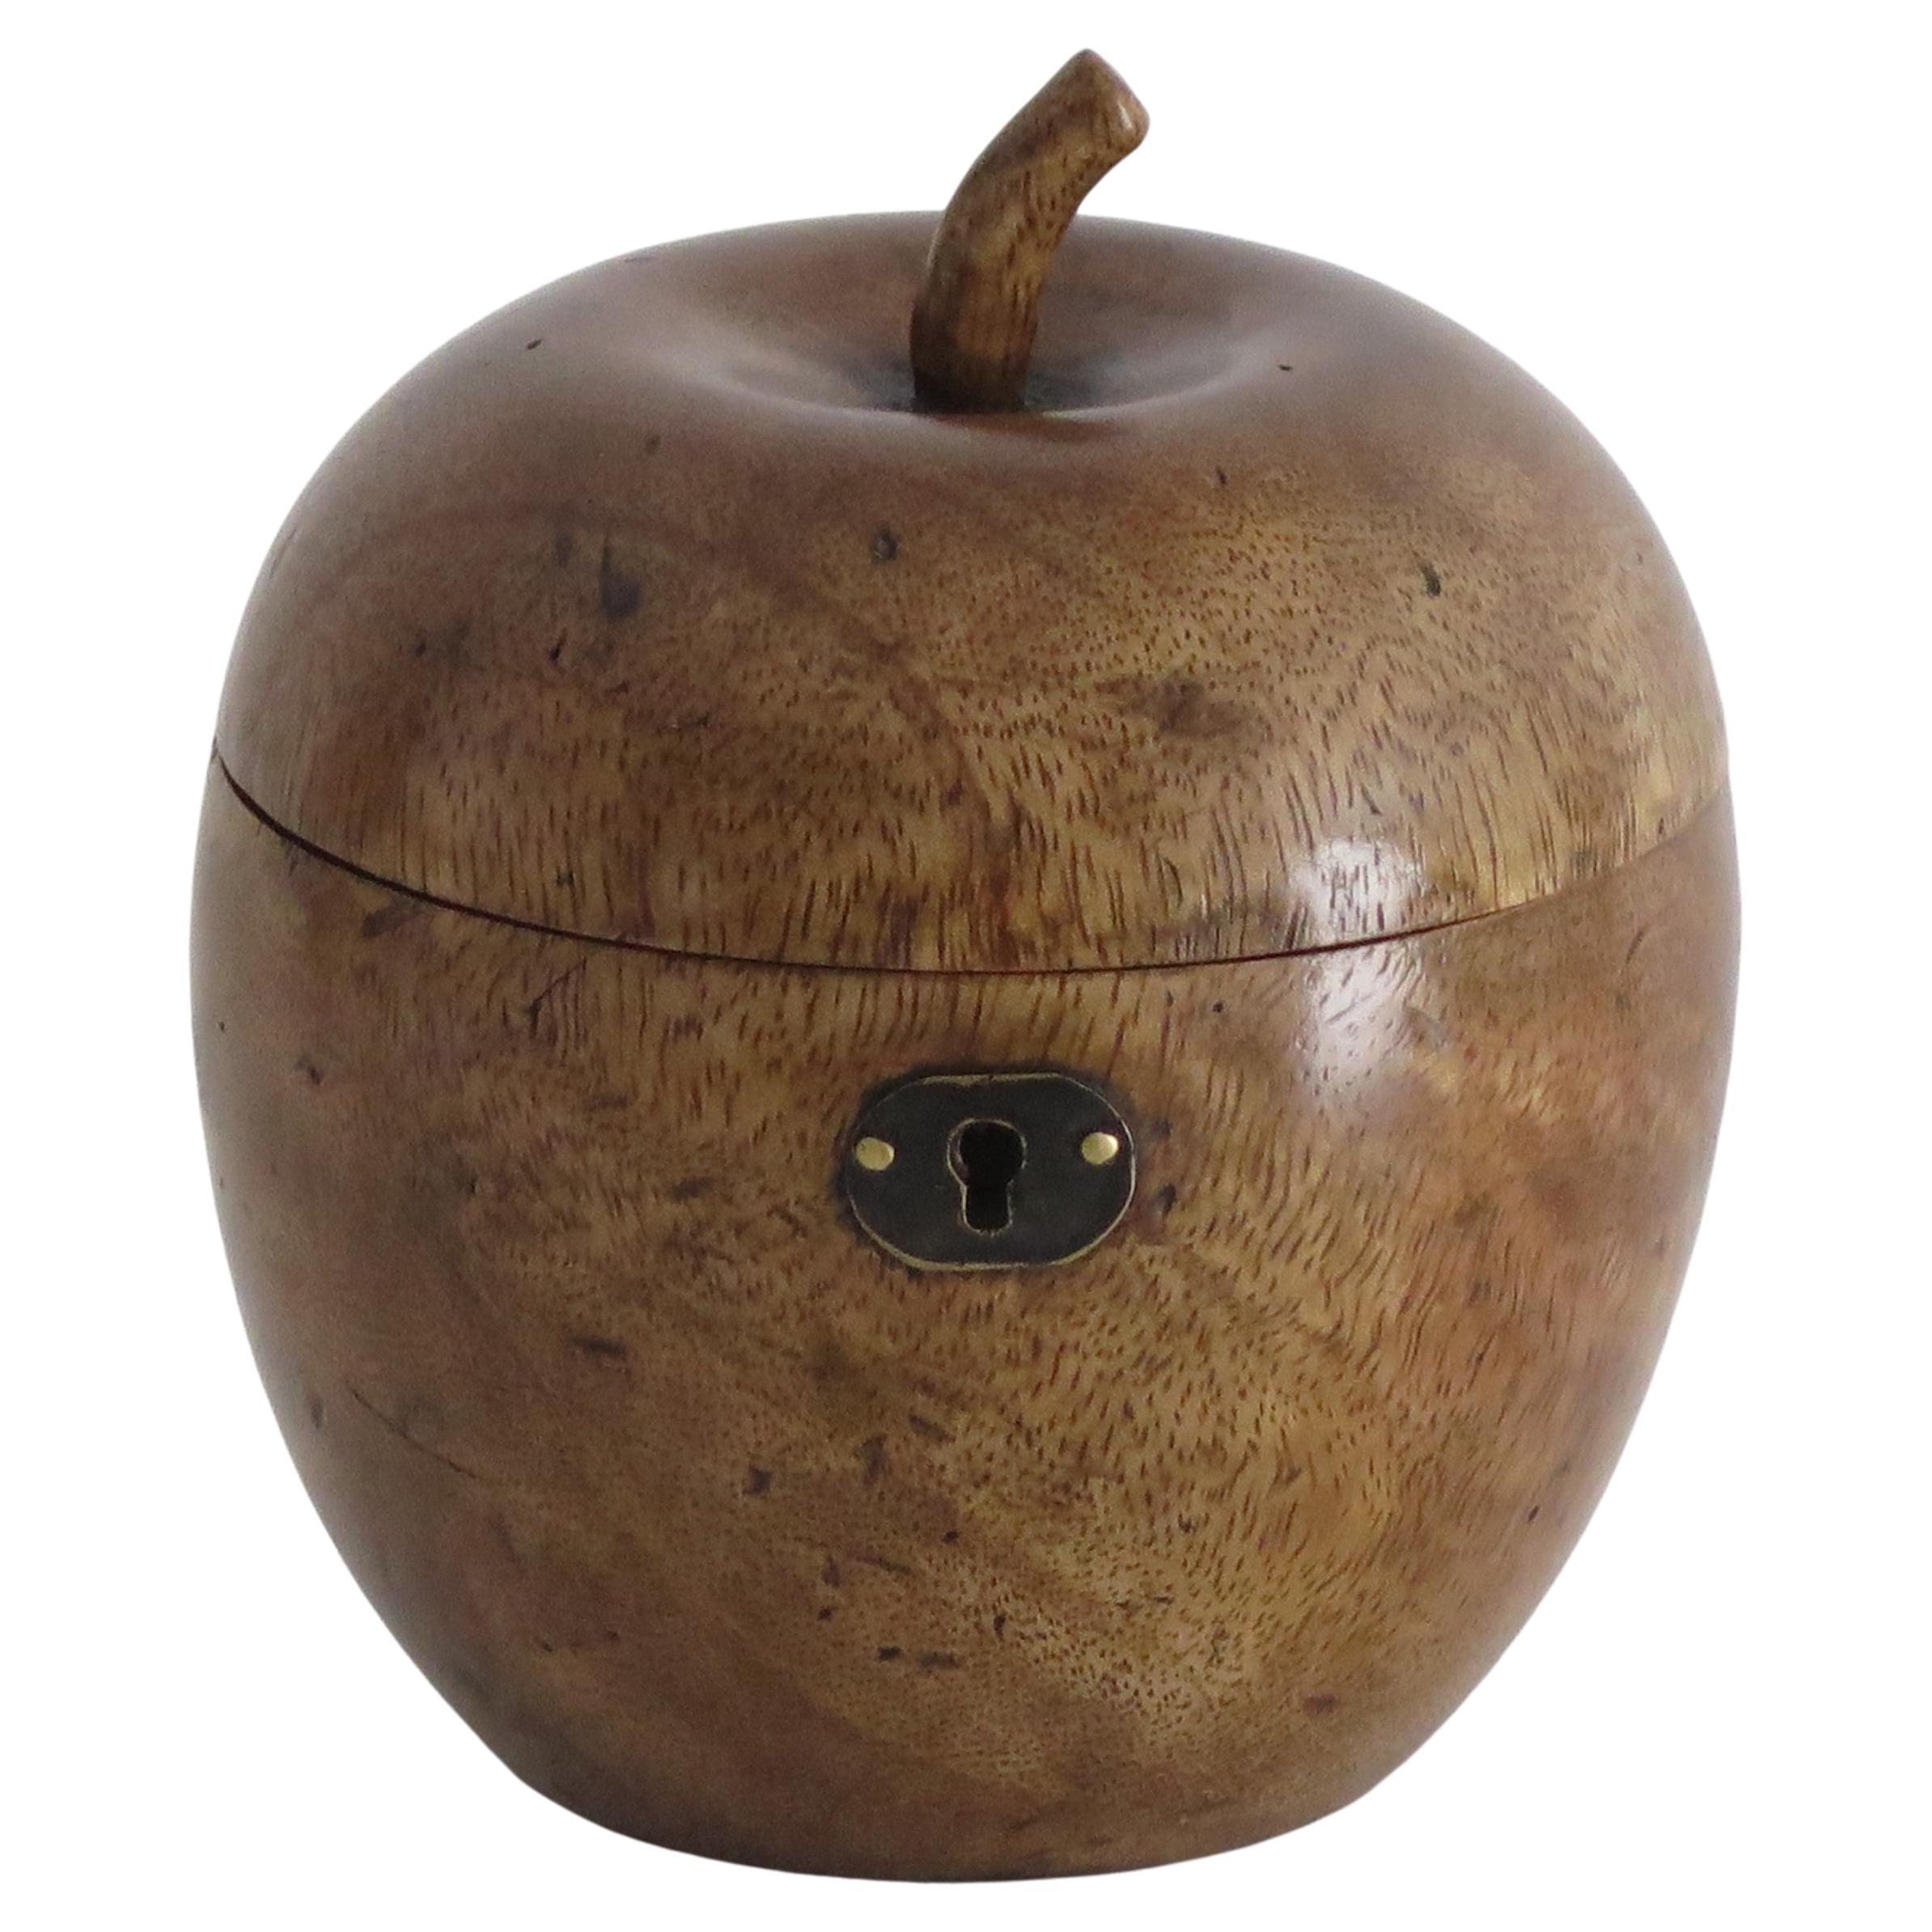 Hand Carved Apple Tea Caddy in Hardwood with Lined Interior, 19th Century